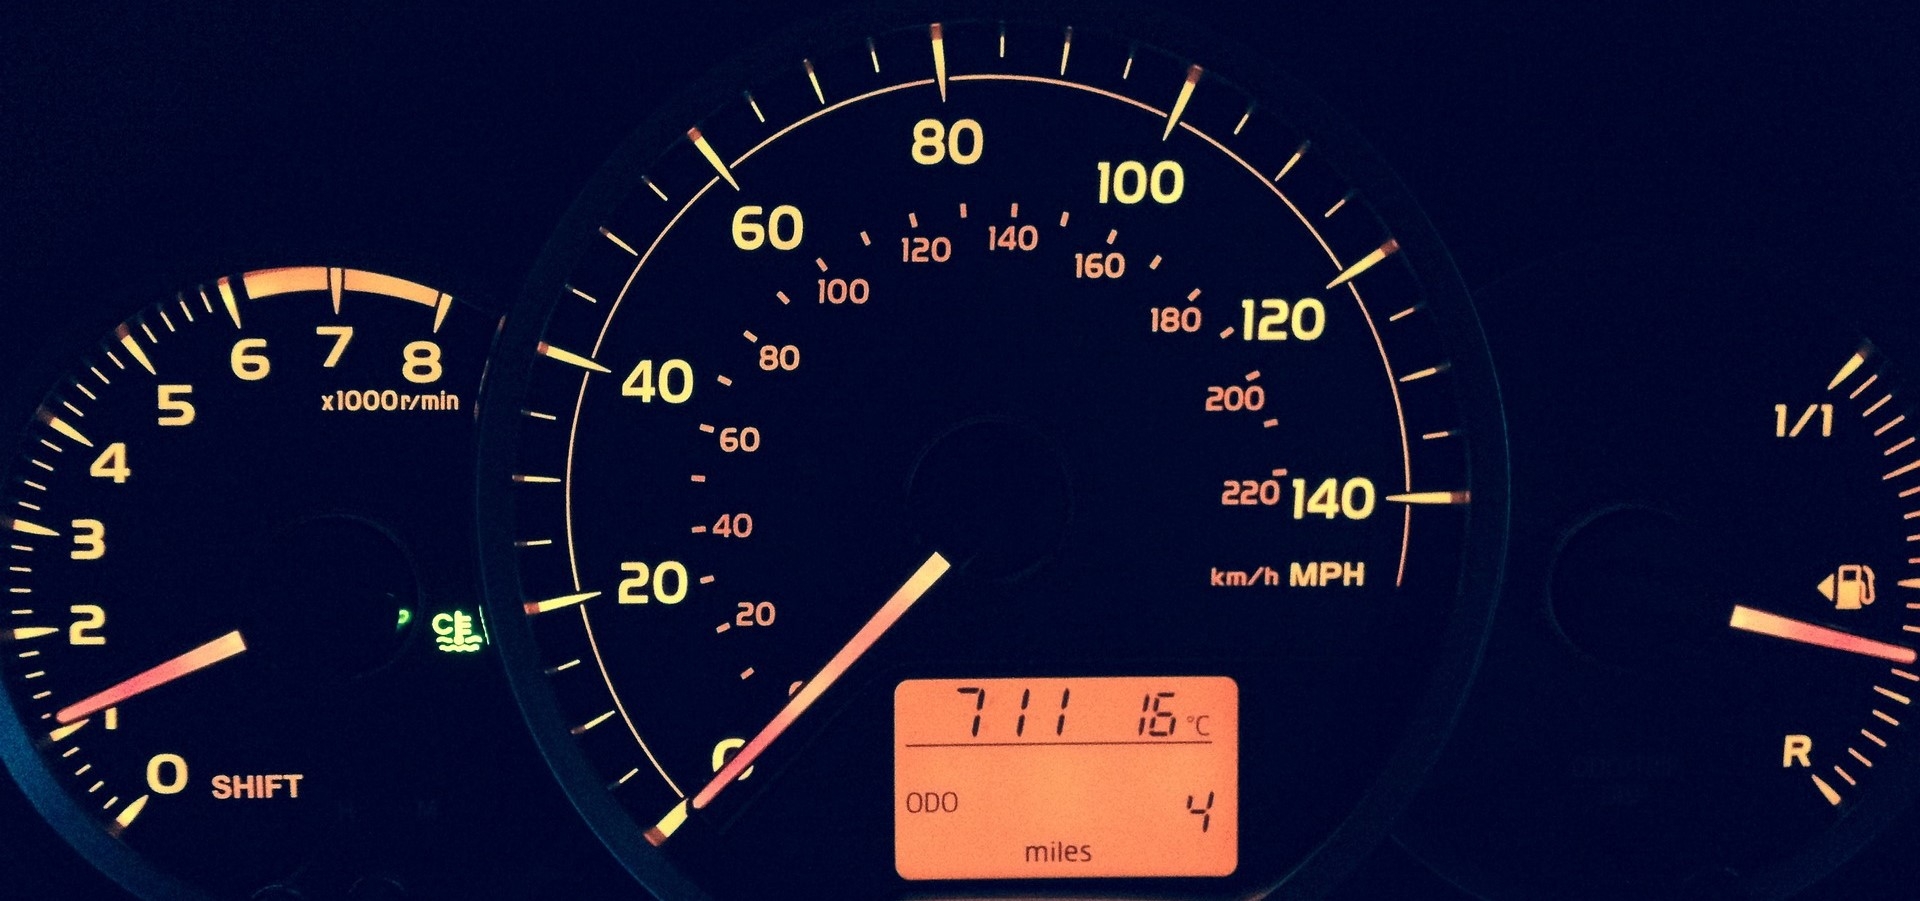 Speedometer-image-by-Jon-Bow-from-Pixabay